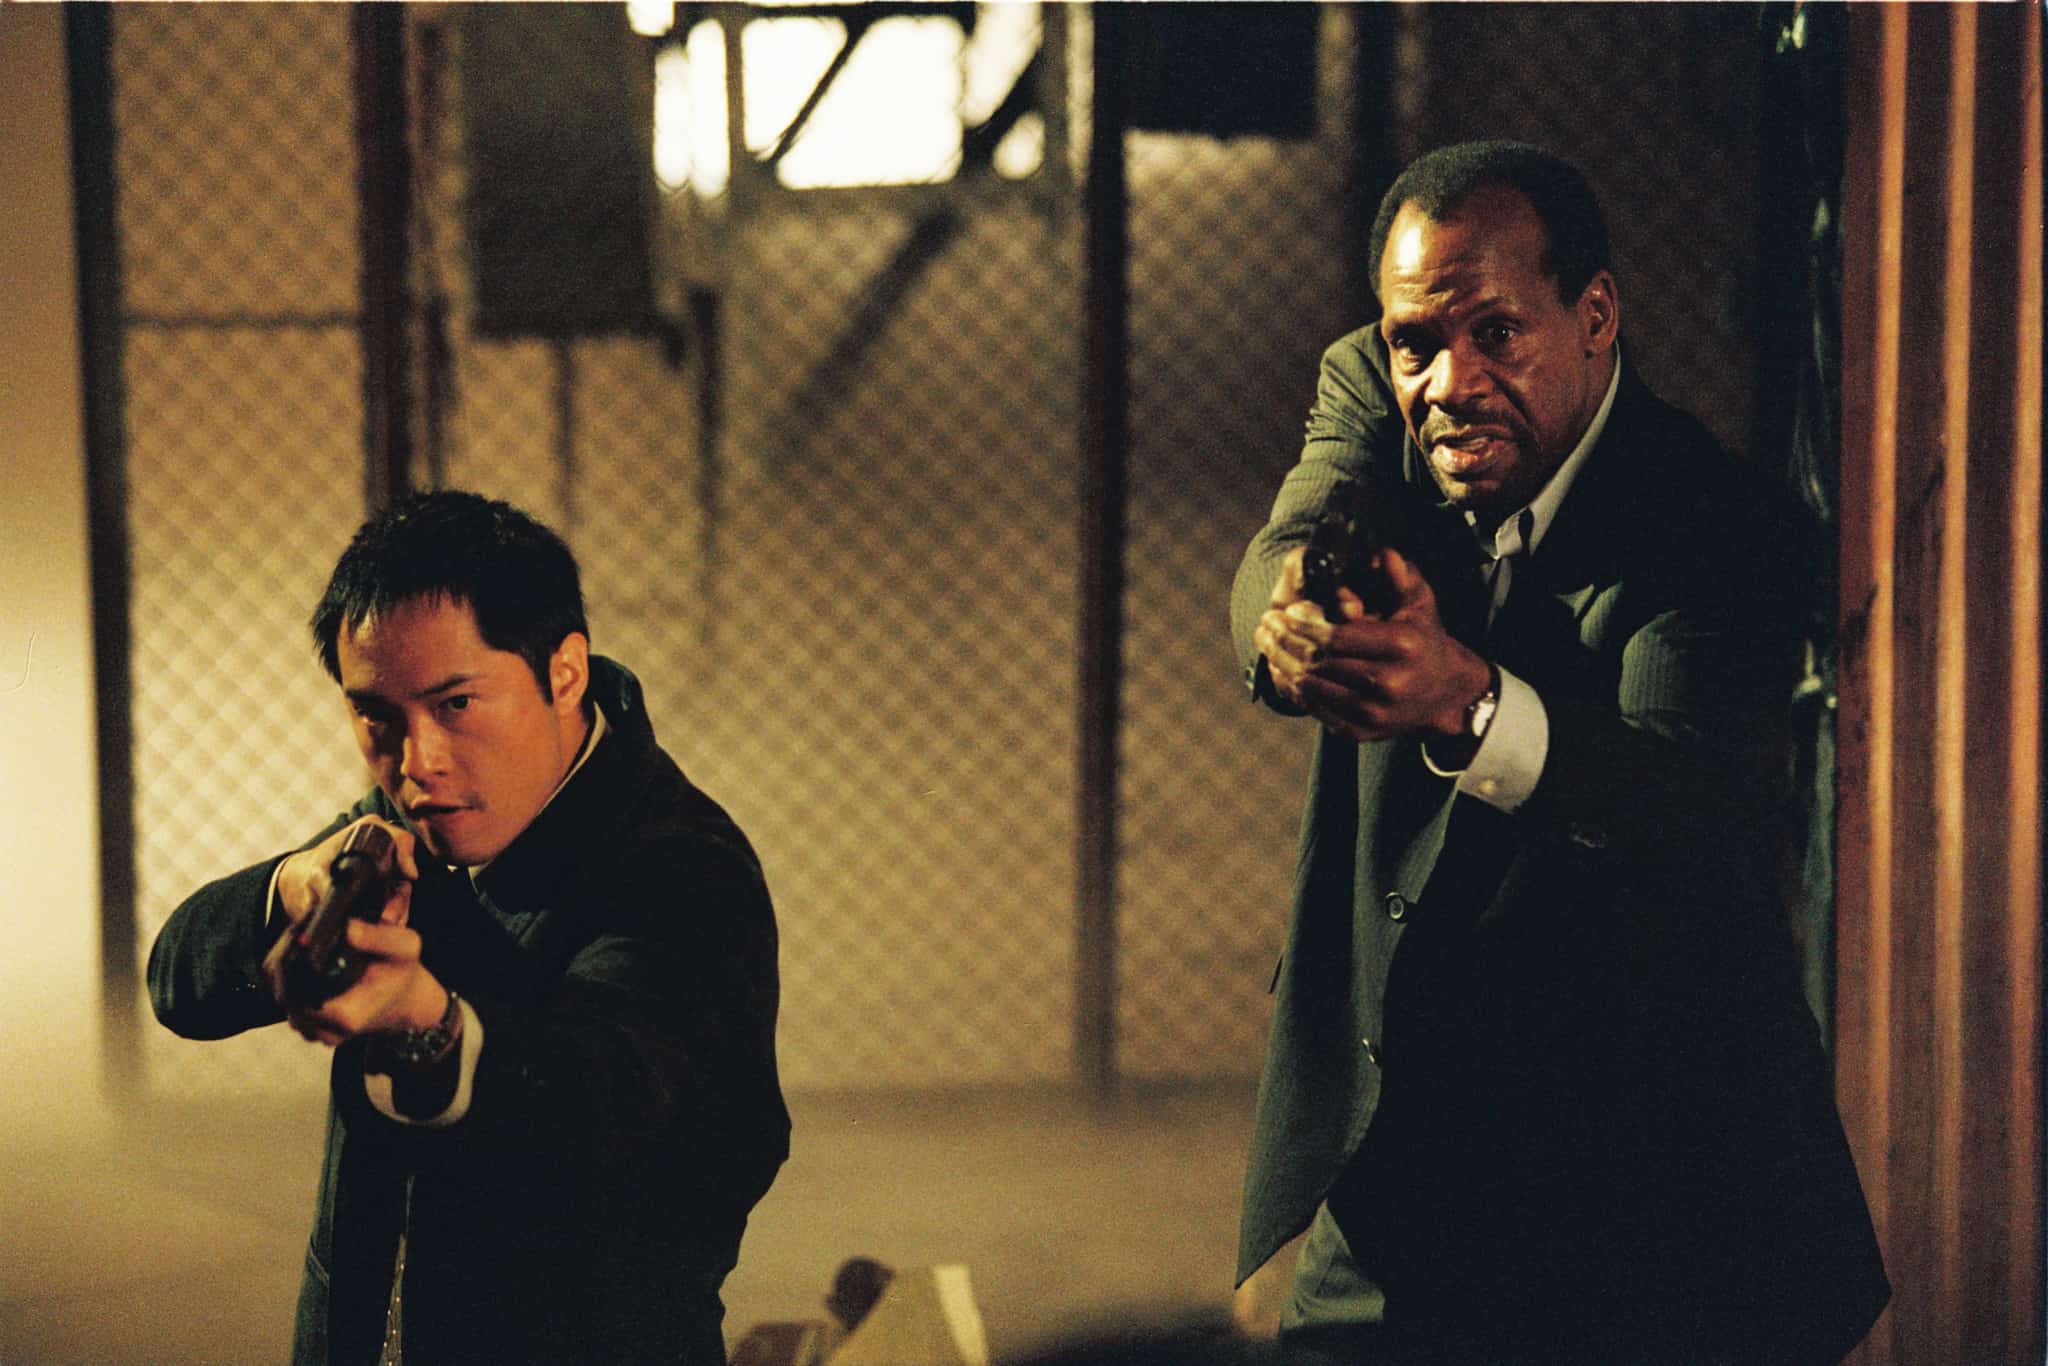 Detective Sing and Tapp in the film, Saw (Credits: Lionsgate)